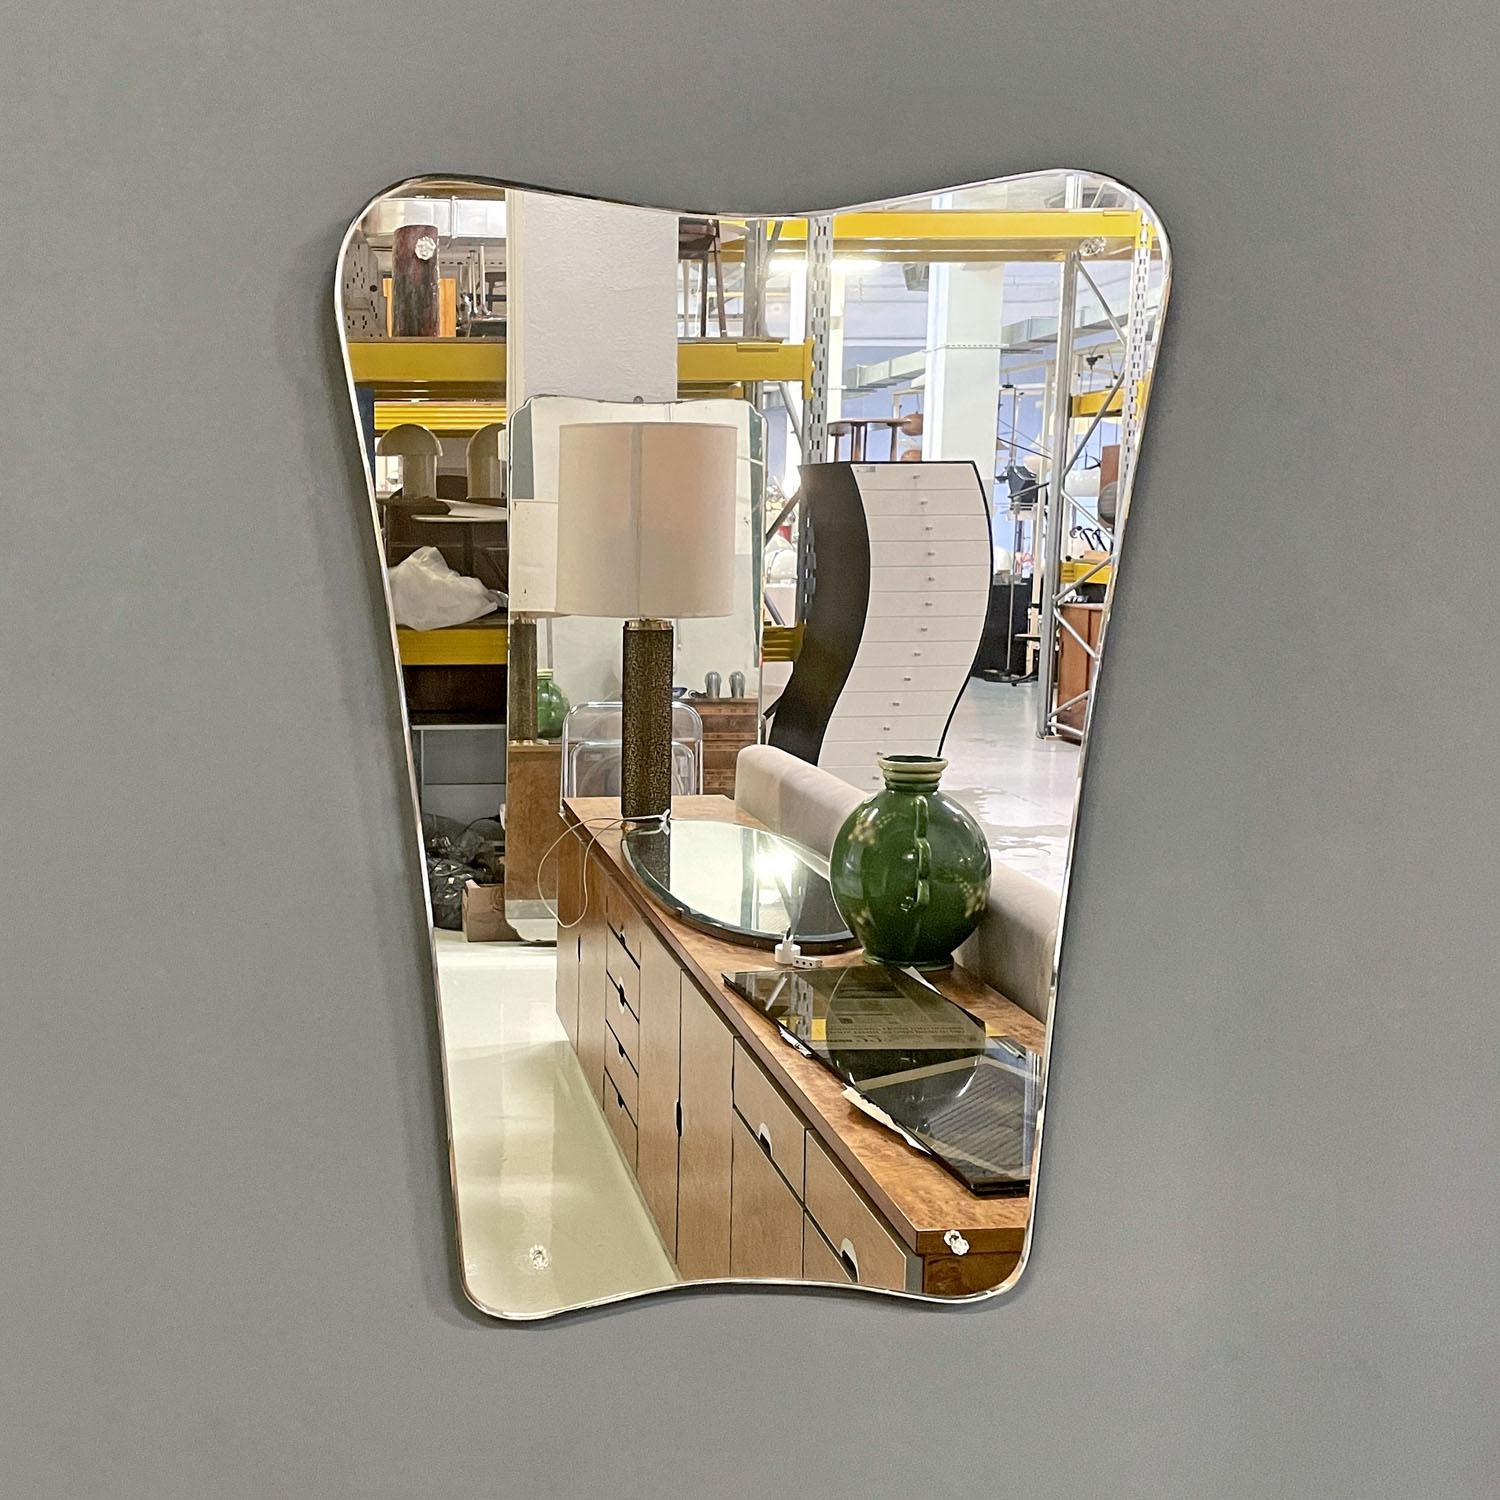 Italian mid-century modern rectangular wall mirror with glass knobs, 1950s
Wall mirror with a rectangular shape. The corners are rounded, the entire perimeter has curved and rounded lines. On the mirror at the corners there are four small